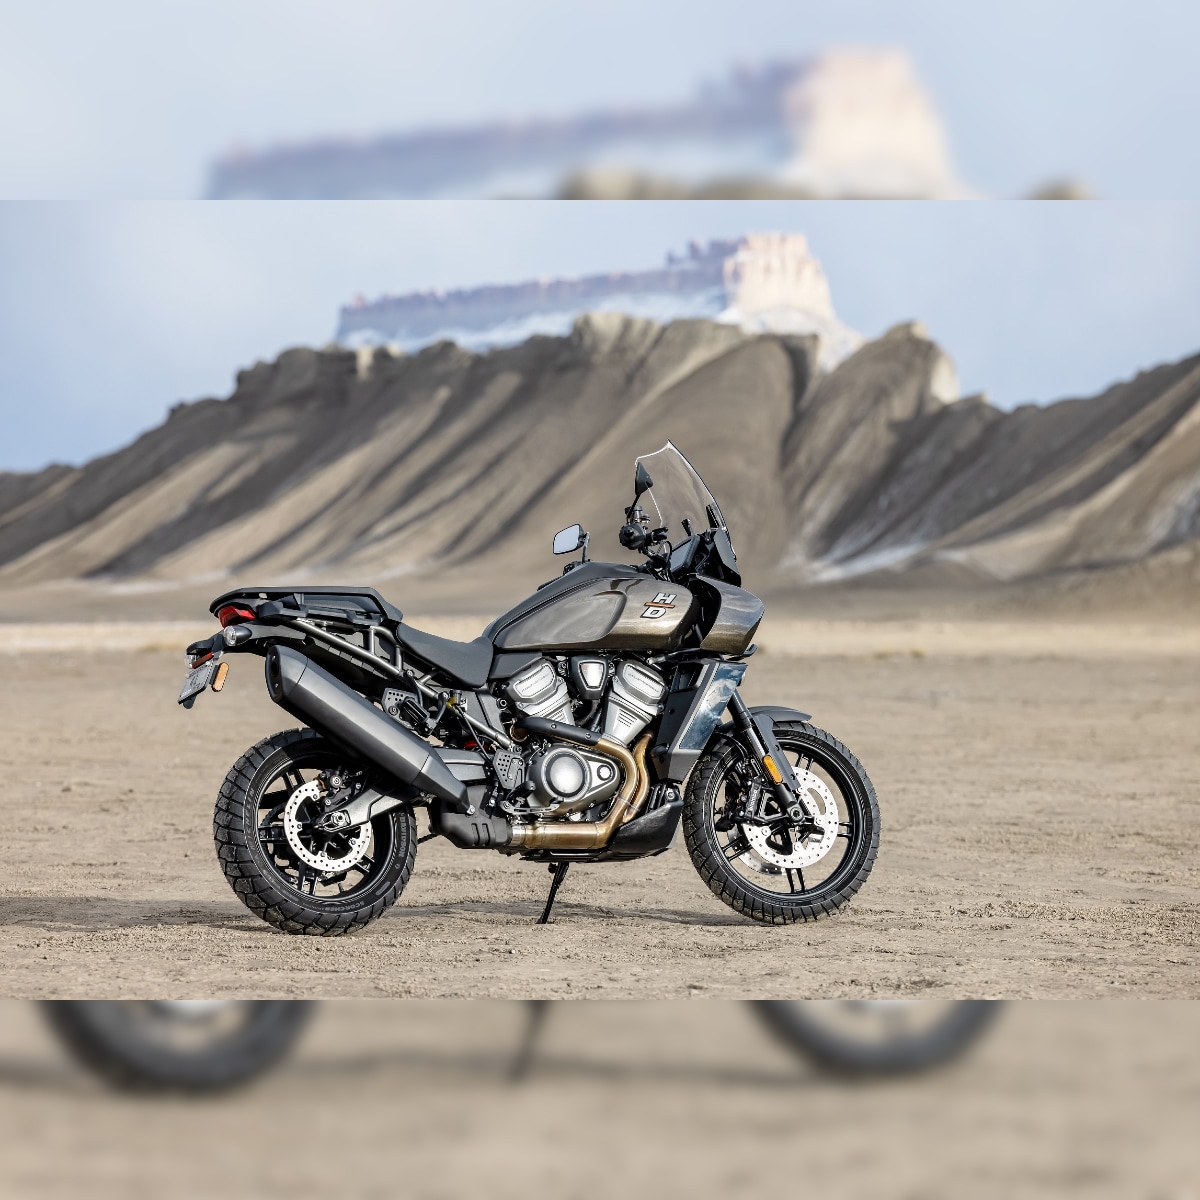 Harley Davidson Pan America 1250 Adventure Motorcycle Debuts In The Us Will Rival Bmw R 1250 Gs In India